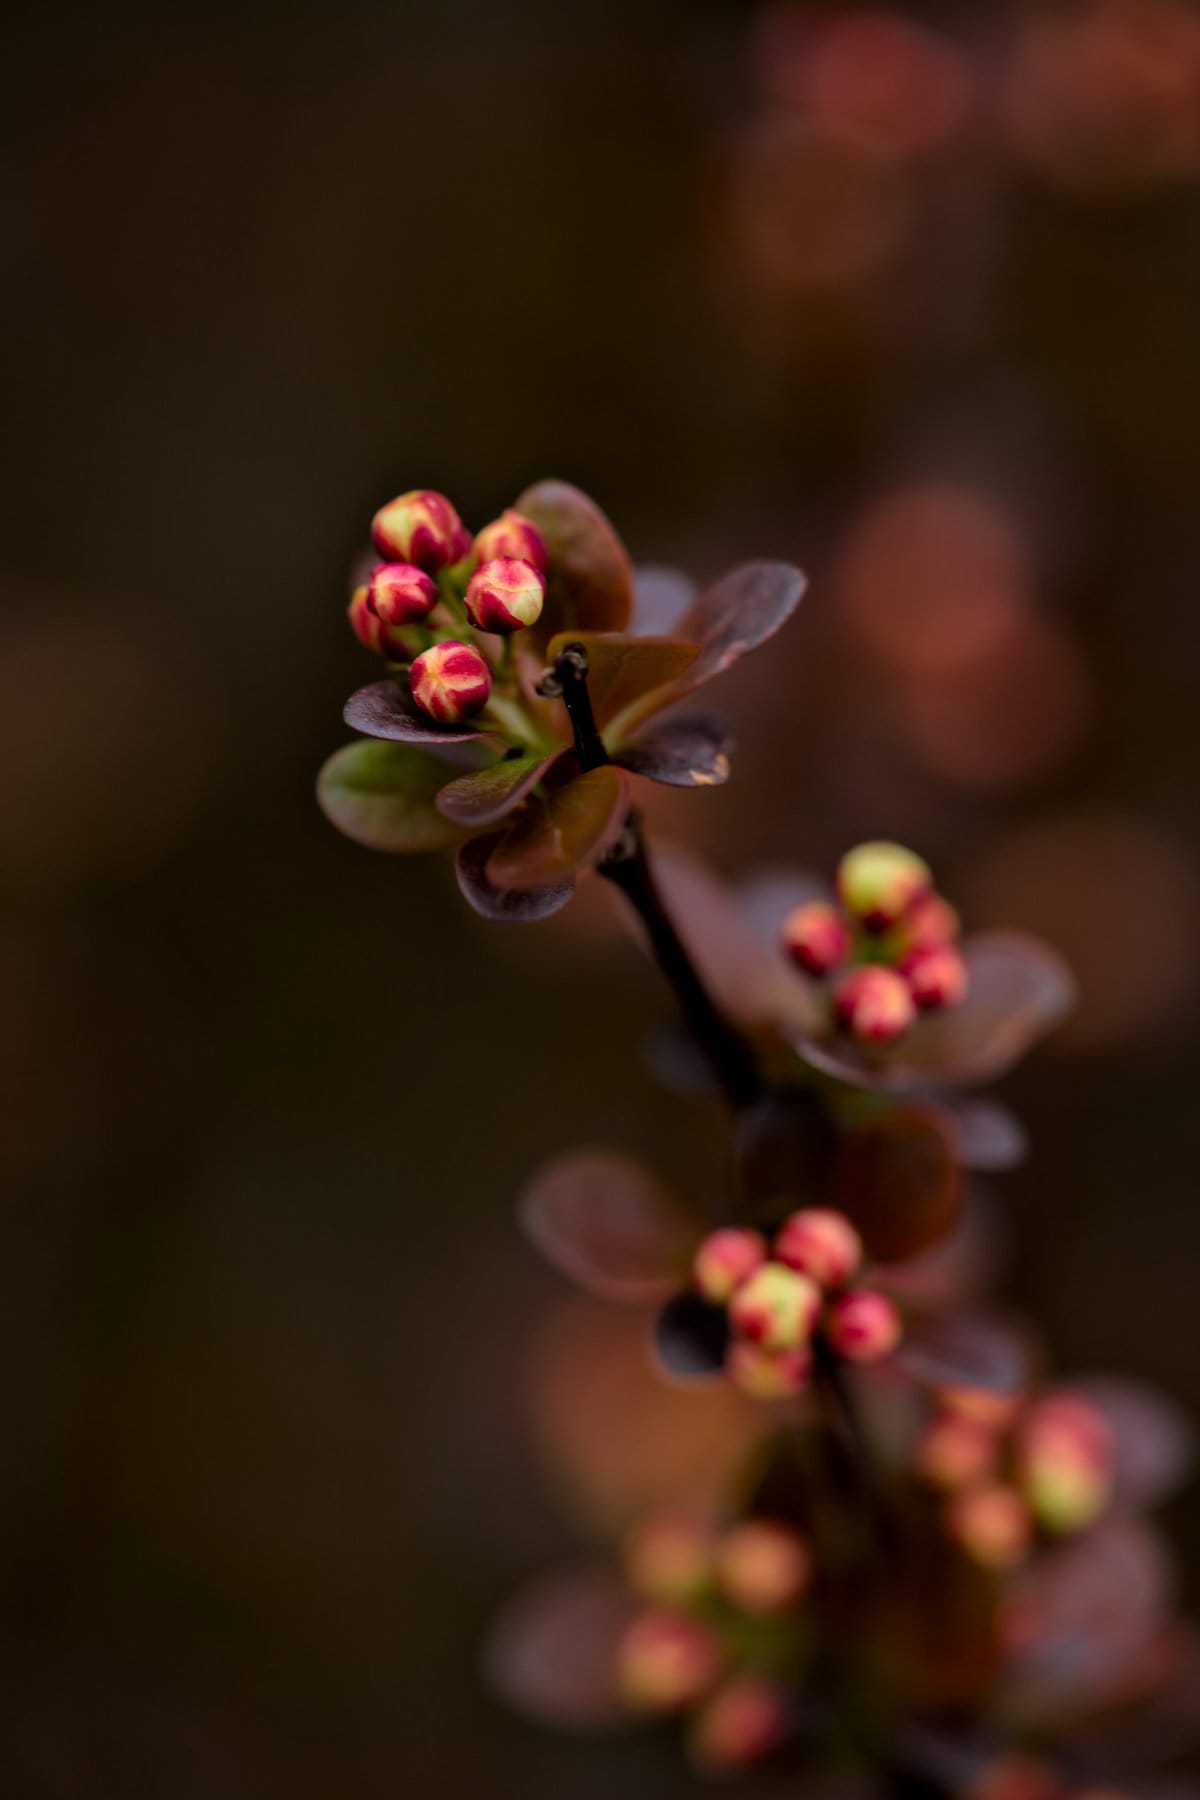 A close up of a small Japanese barberry plant with red and yellow flowers.